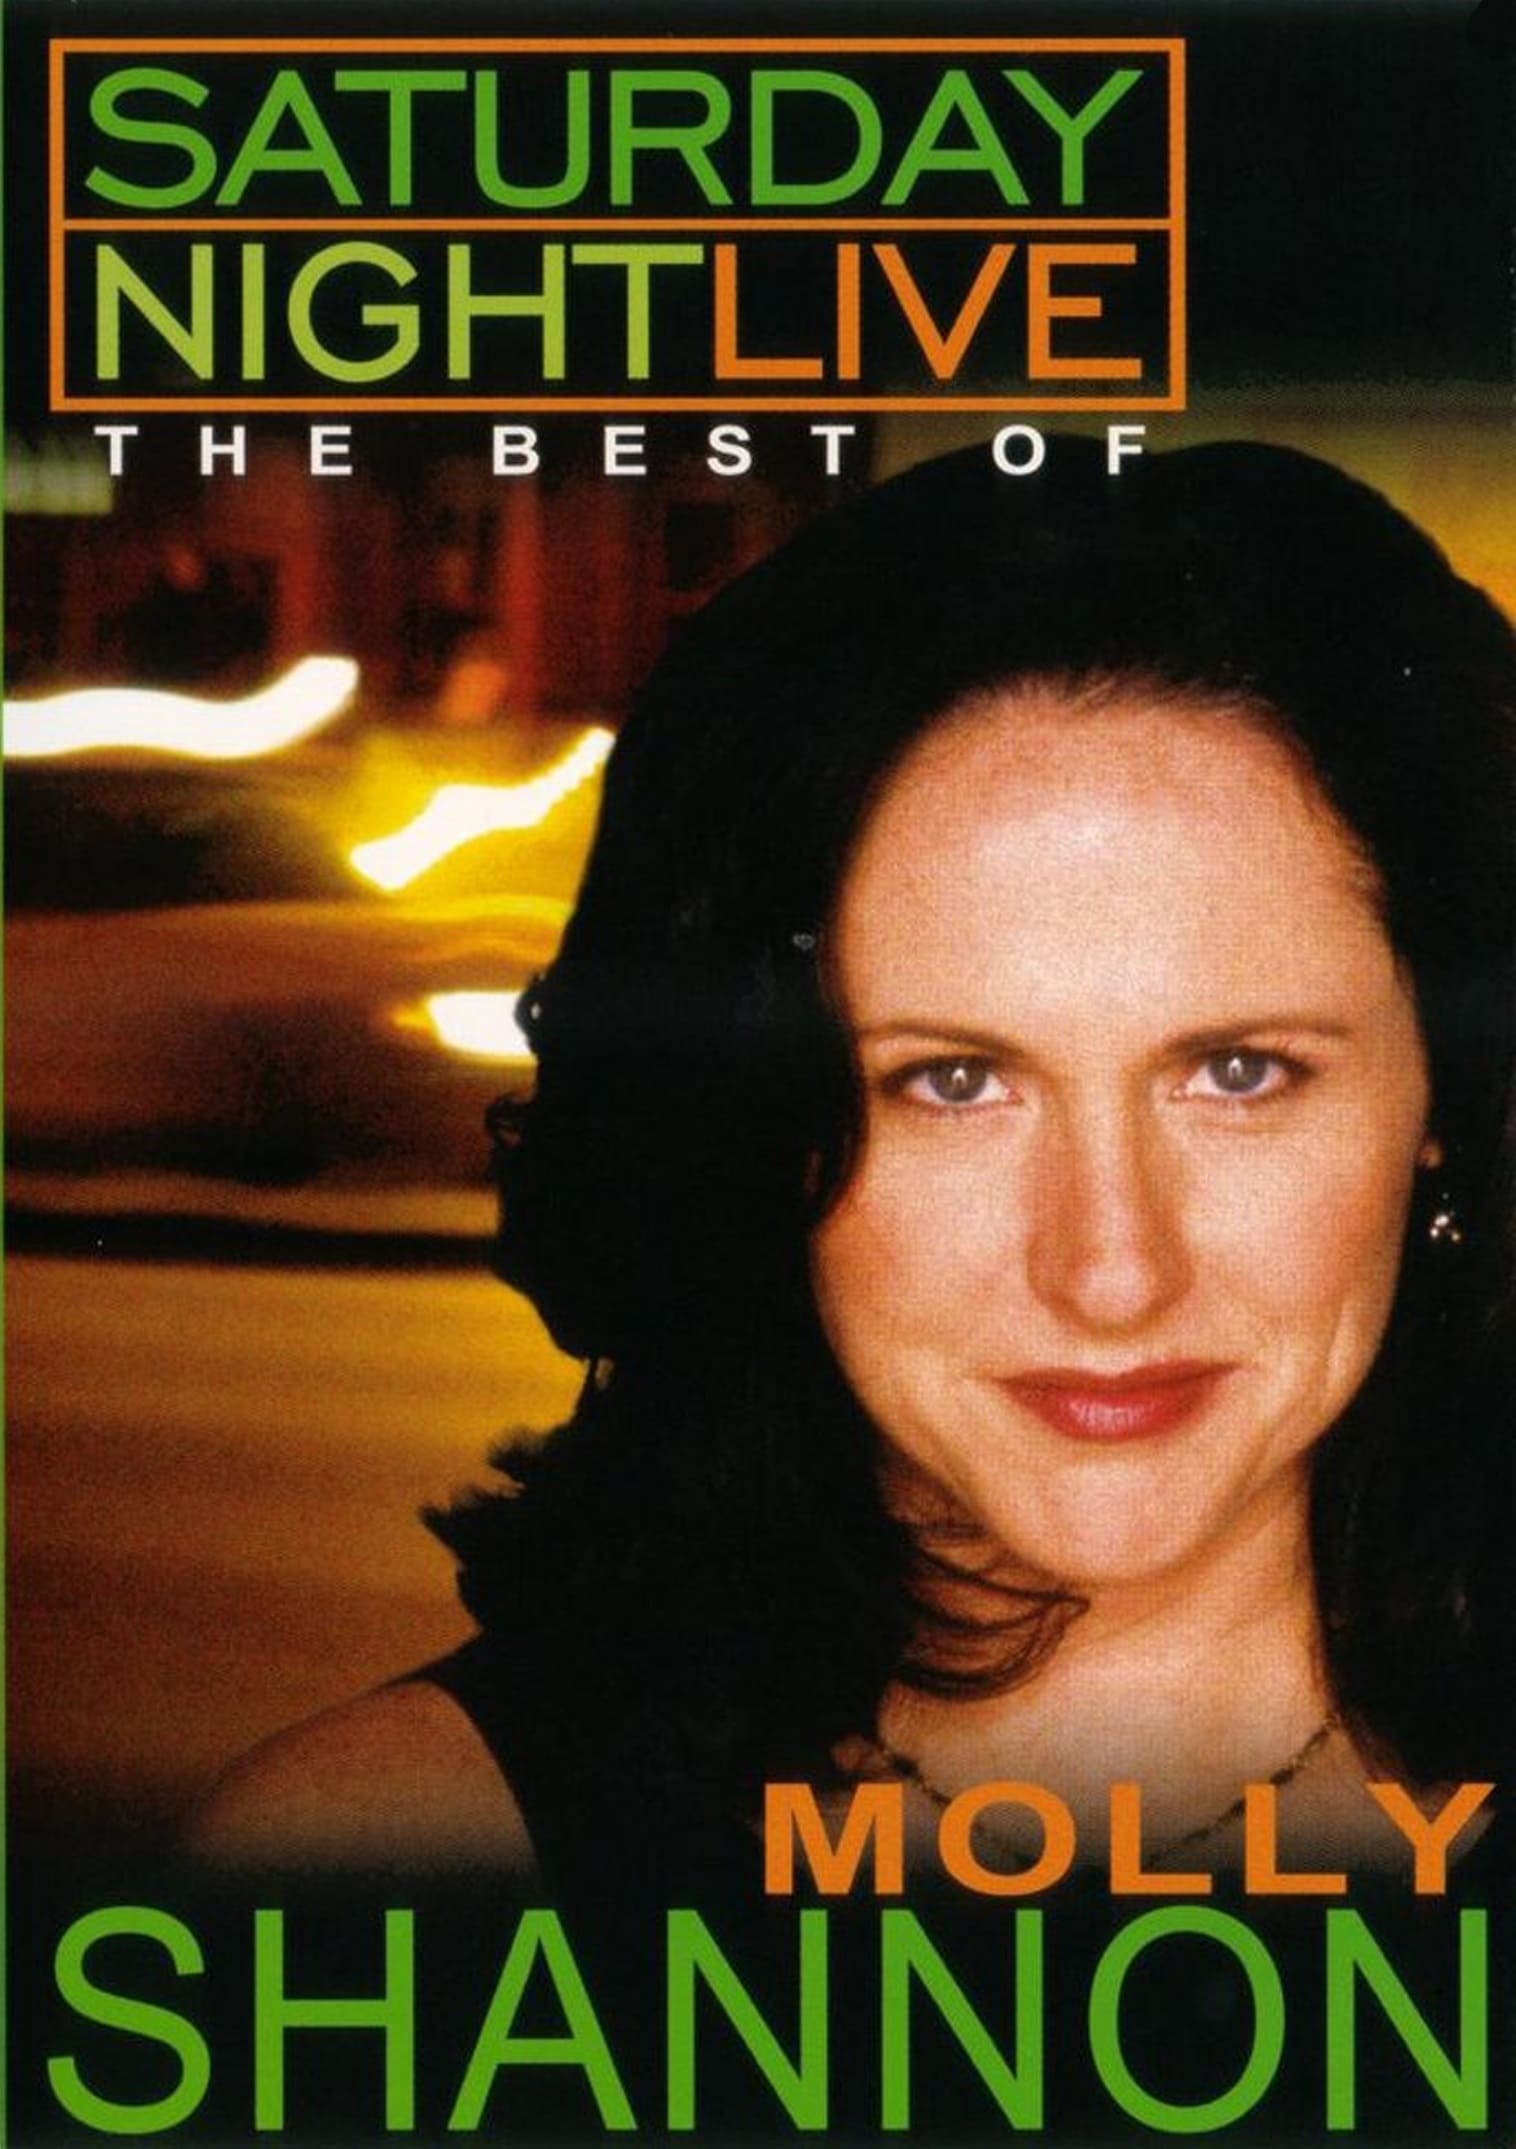 Saturday Night Live: The Best of Molly Shannon (2001)